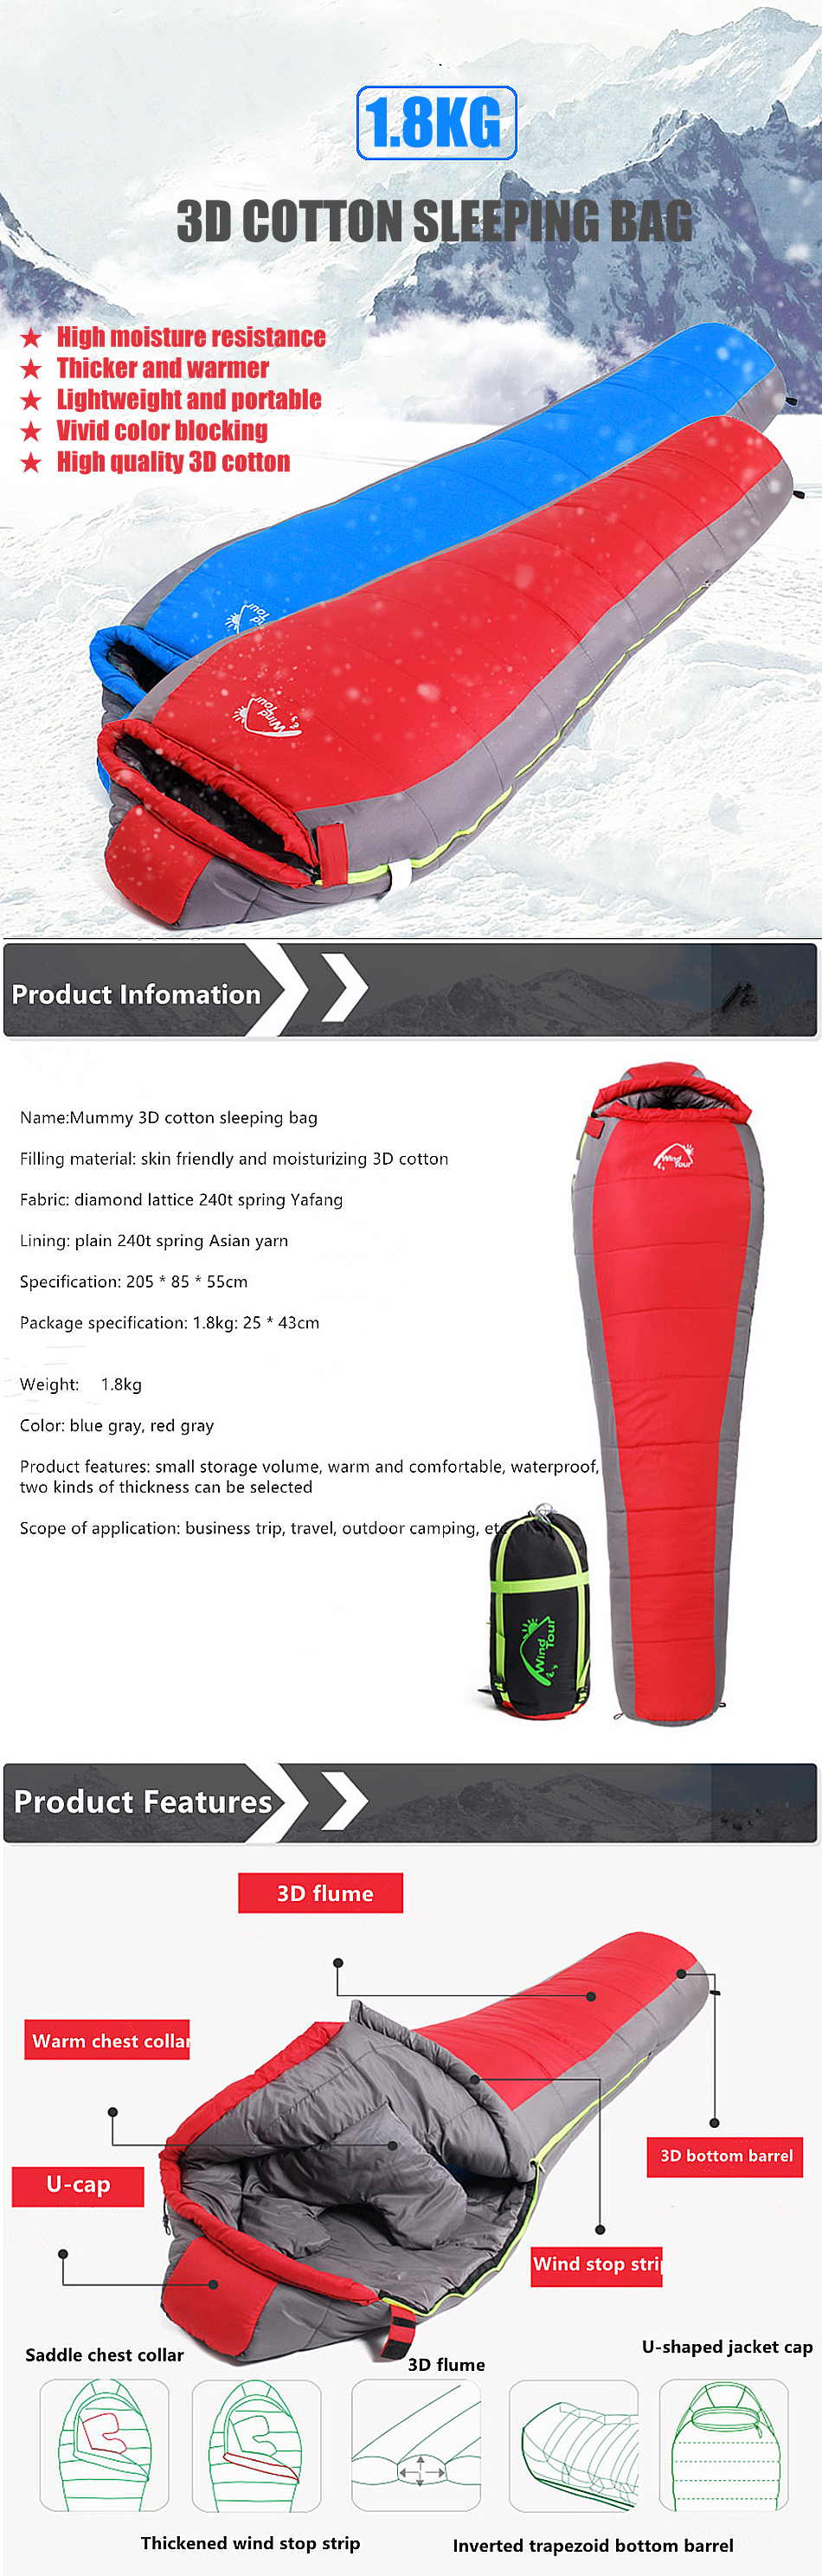 WIND-TOUR-Ultralight-Outdoor-Sleeping-Bag-18KG-Cotton-Hiking-Camping-Sleeping-Bag-Splicing-Thickened-1756712-1